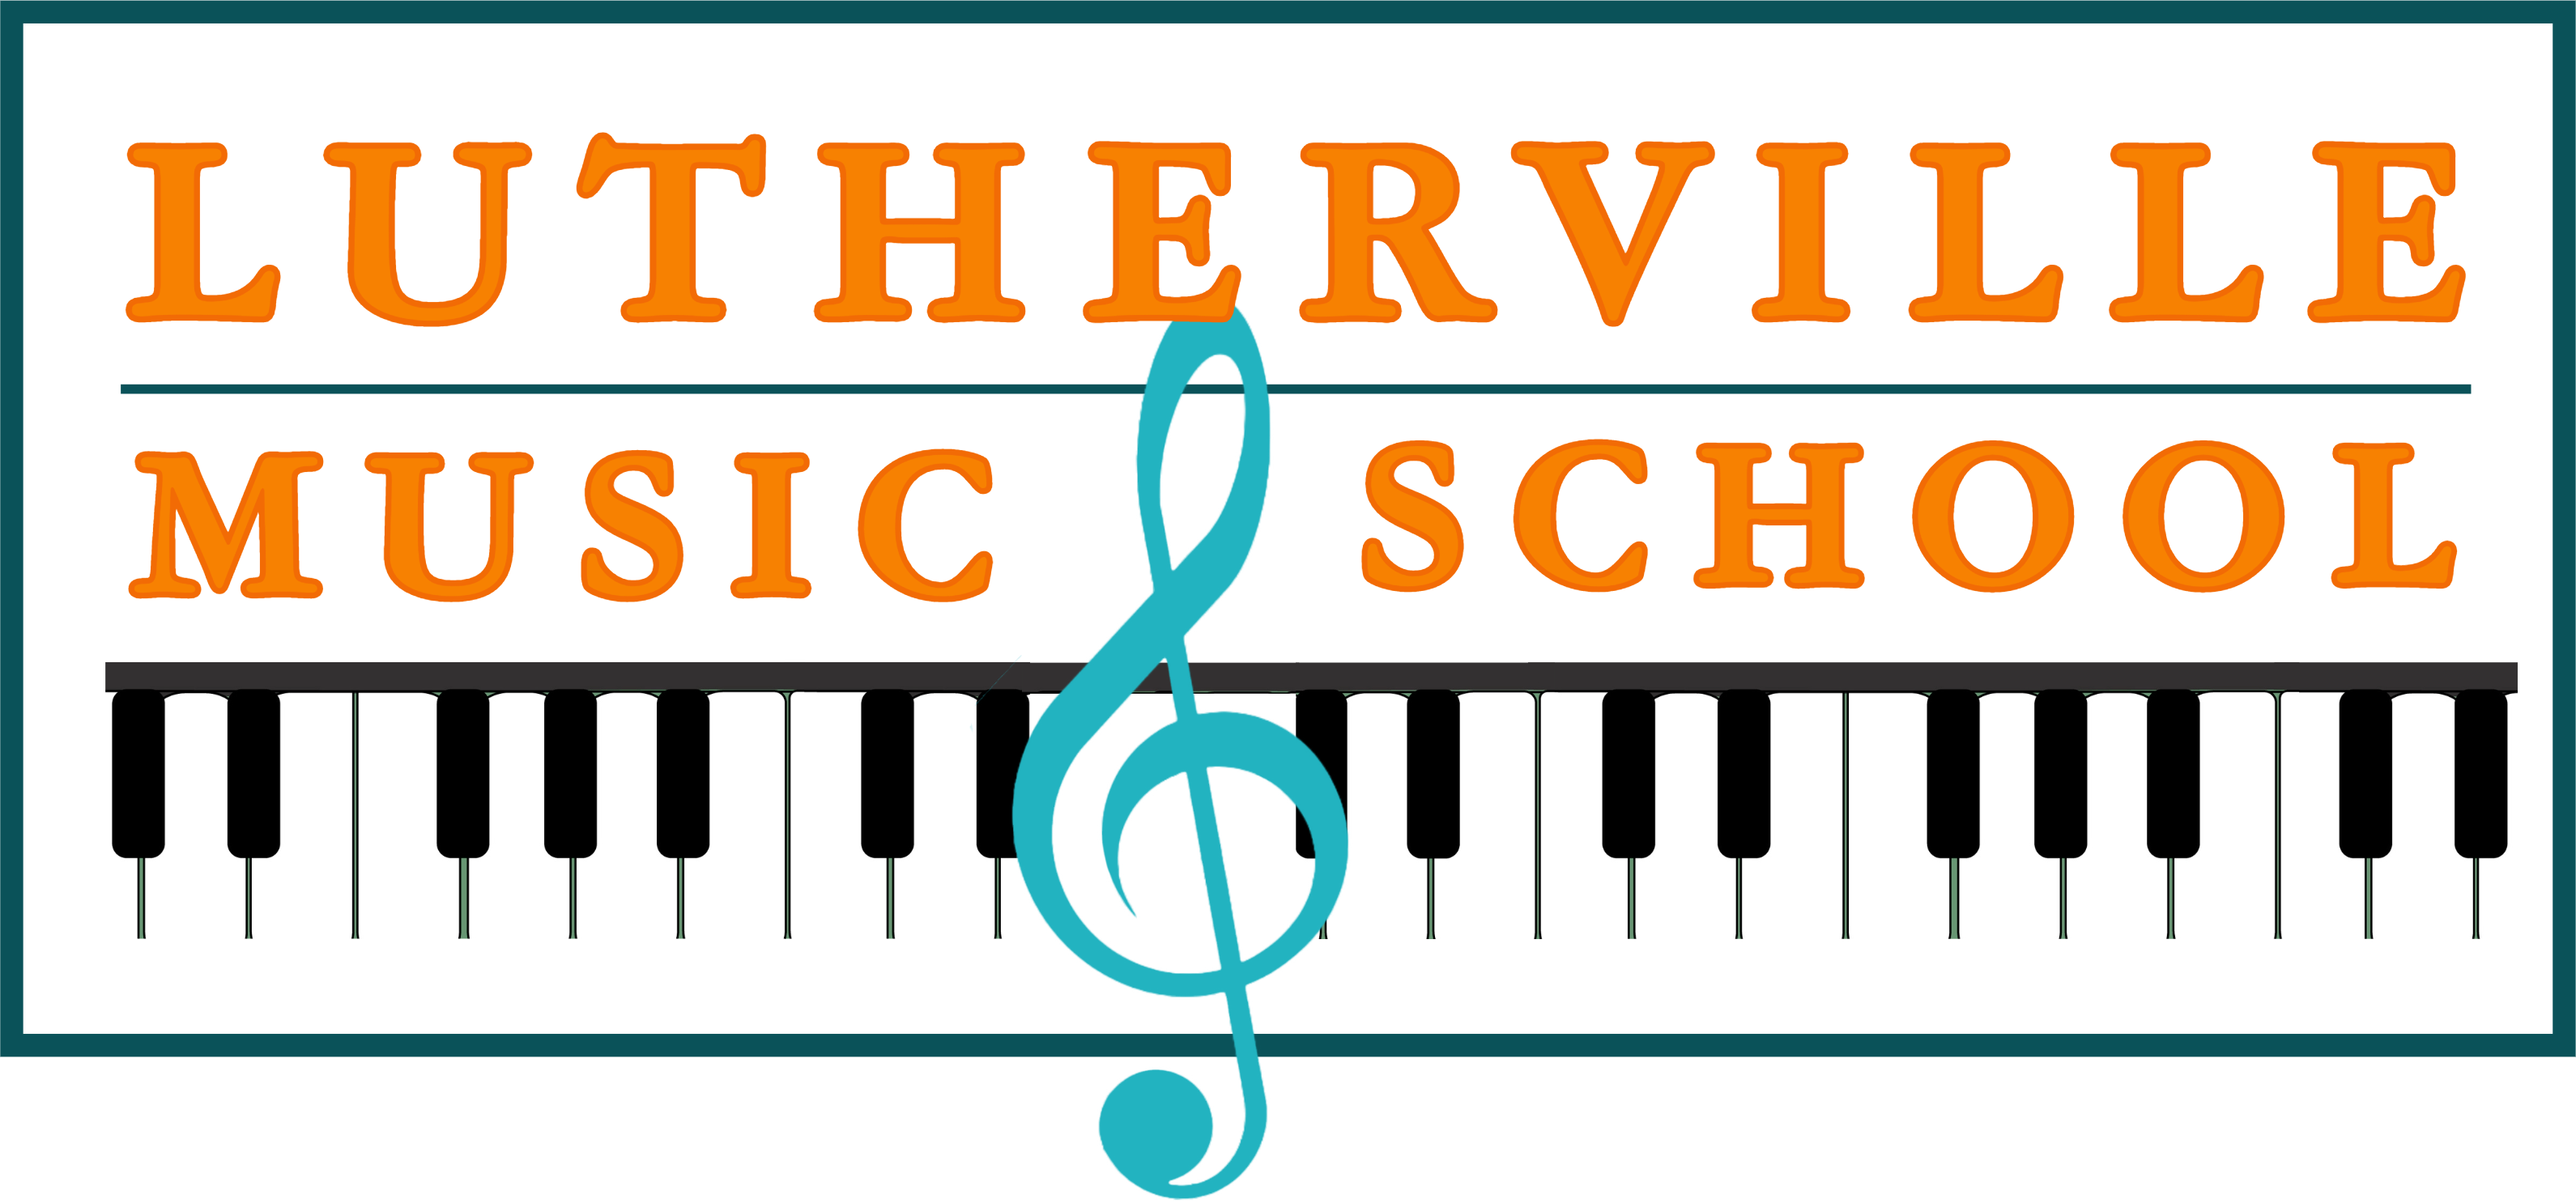 Brand logo of Lutherville Music School